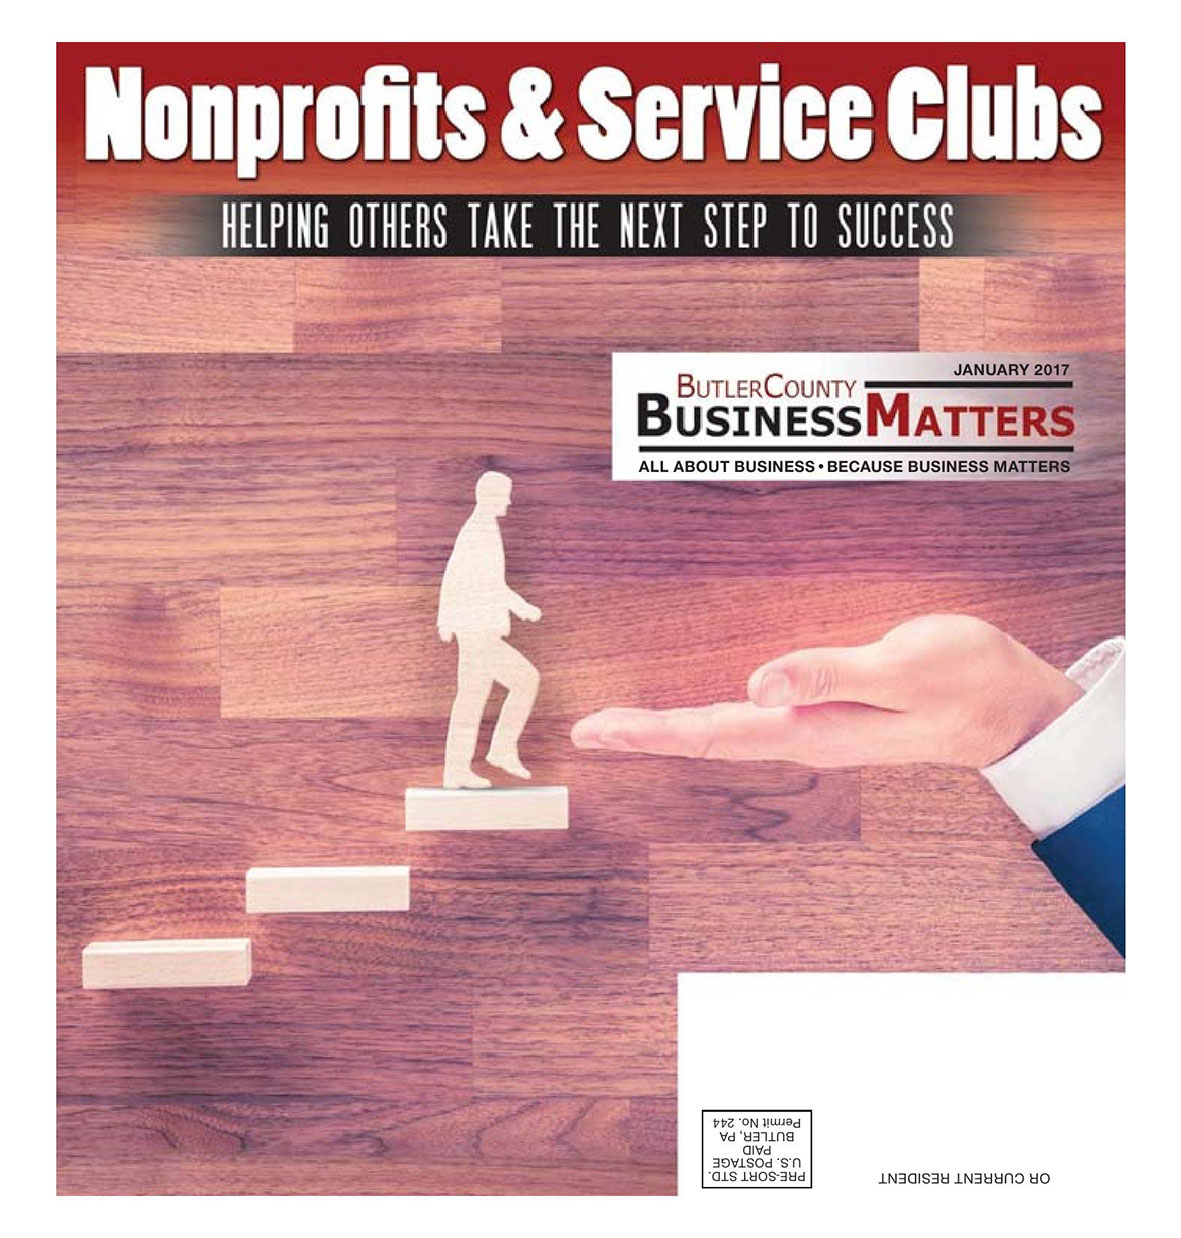 January 2017 - Nonprofits & Service Clubs - Helping Others Take the Next Step to Success